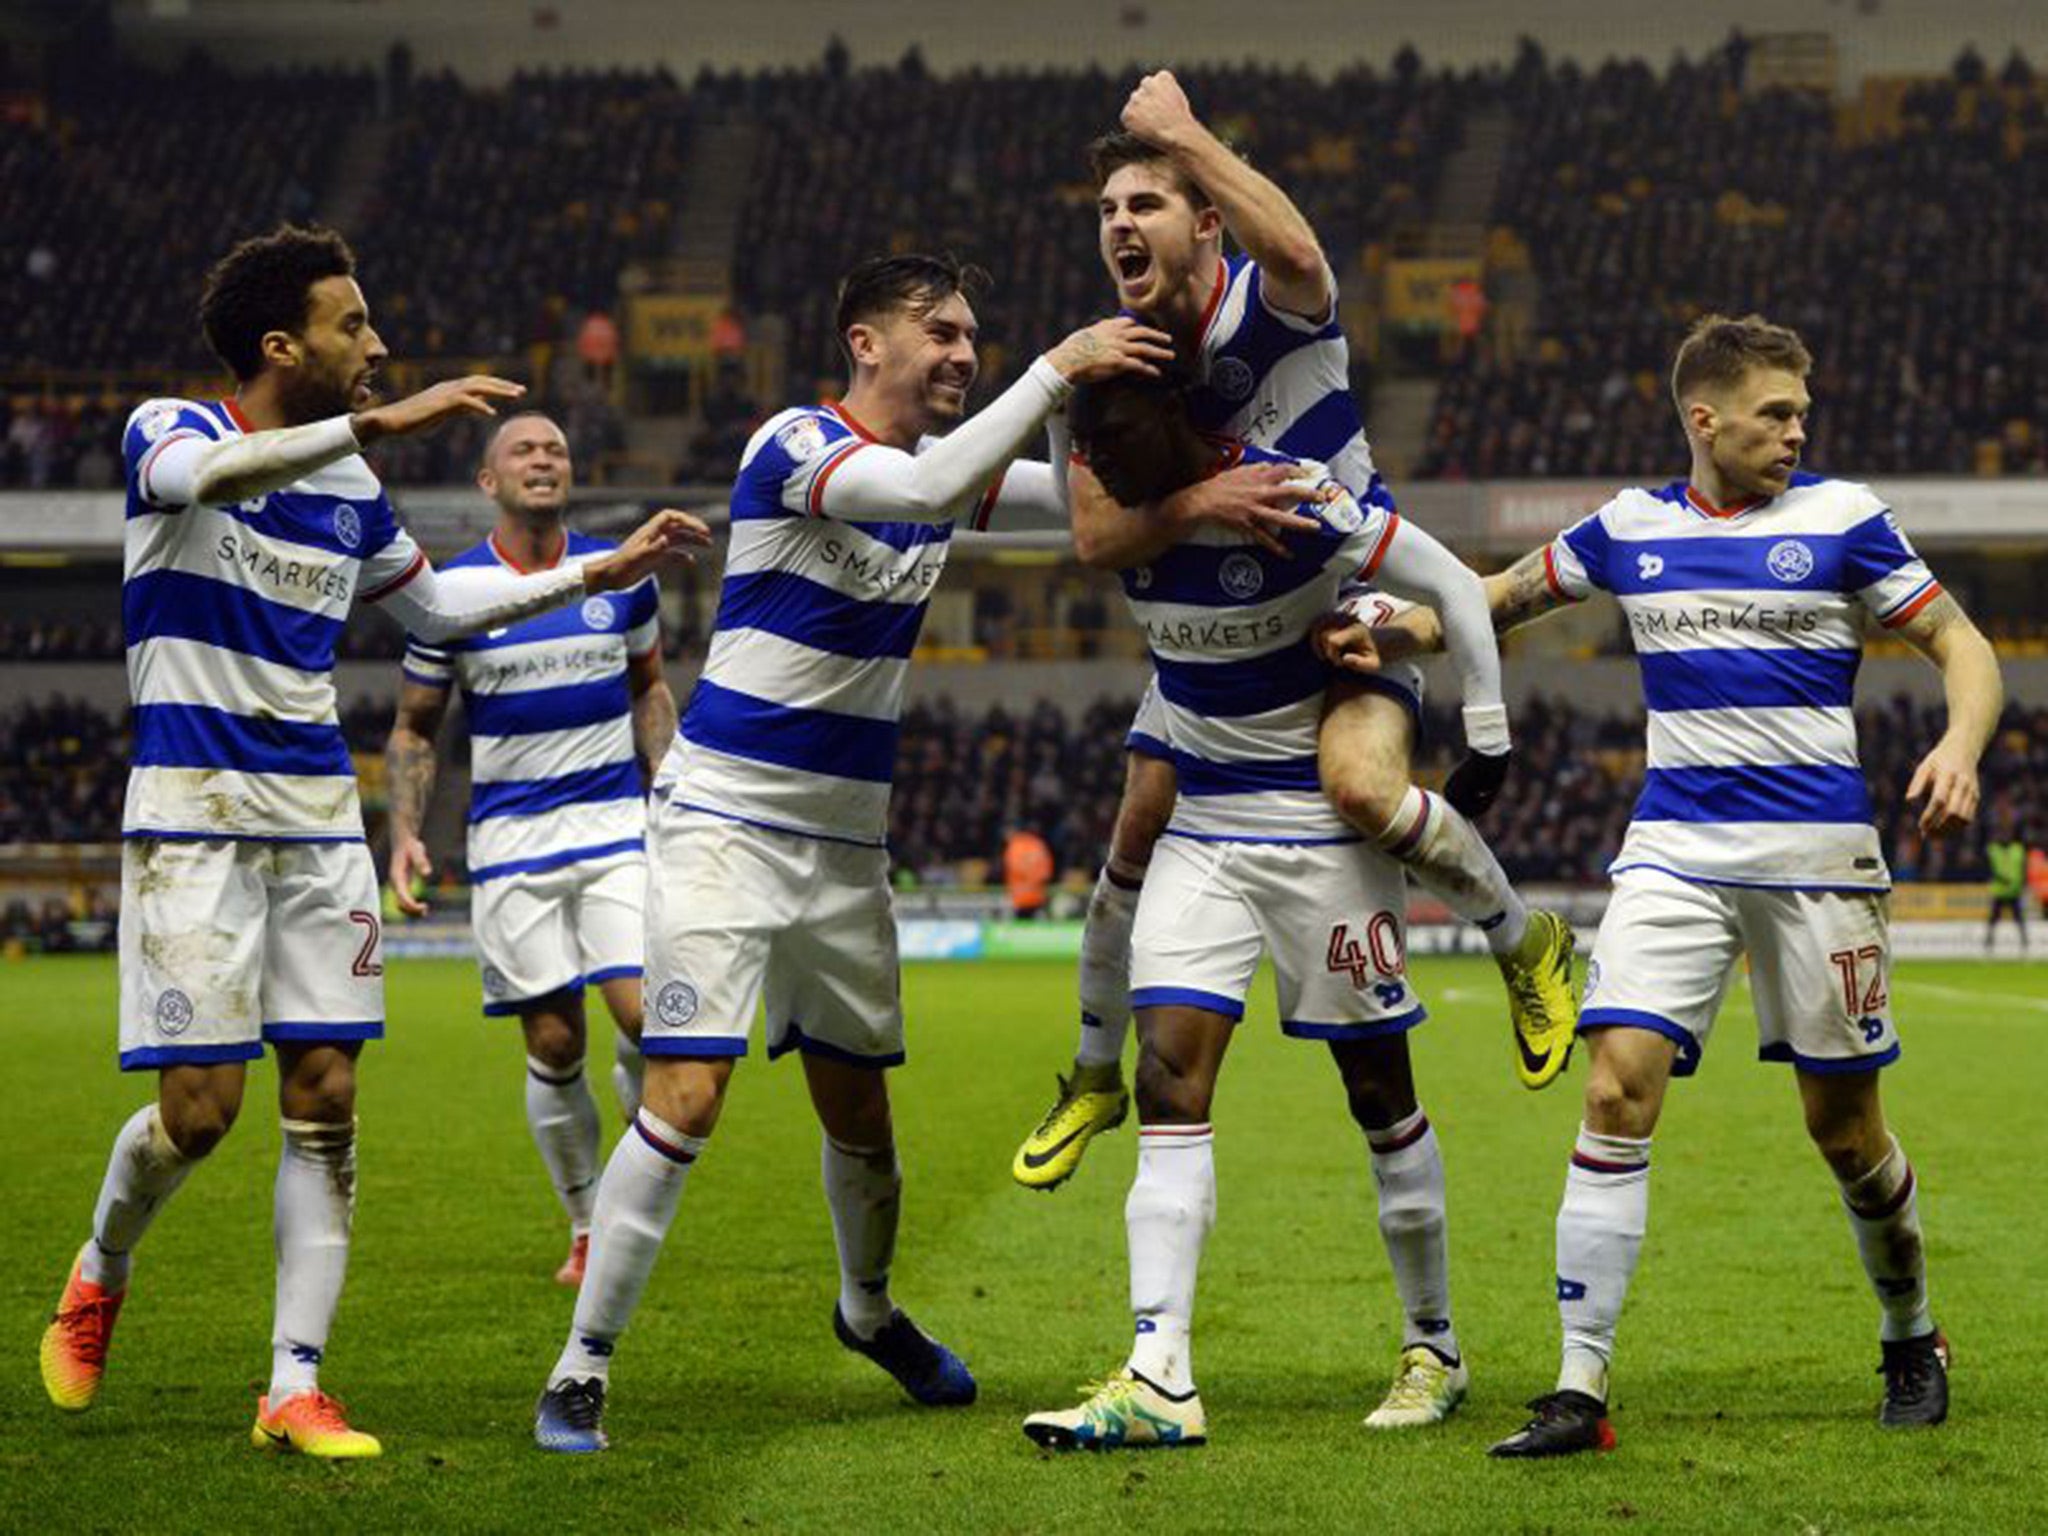 Queens Park Rangers ended their horrific run of form at Molineux